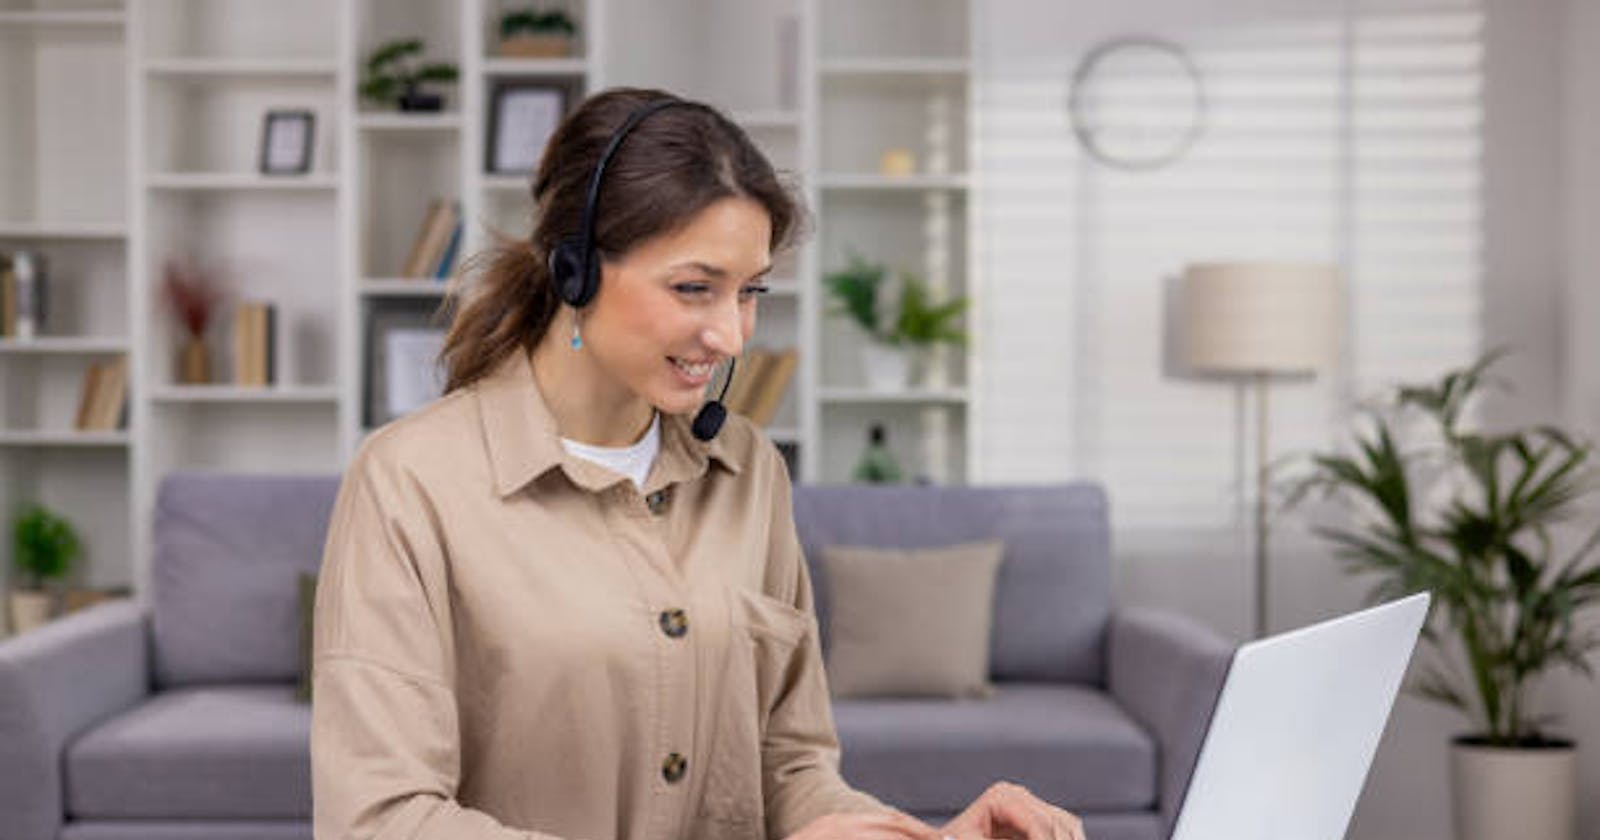 Affordable Paralegal Services: The Essentiality of Remote Support for Law Firms